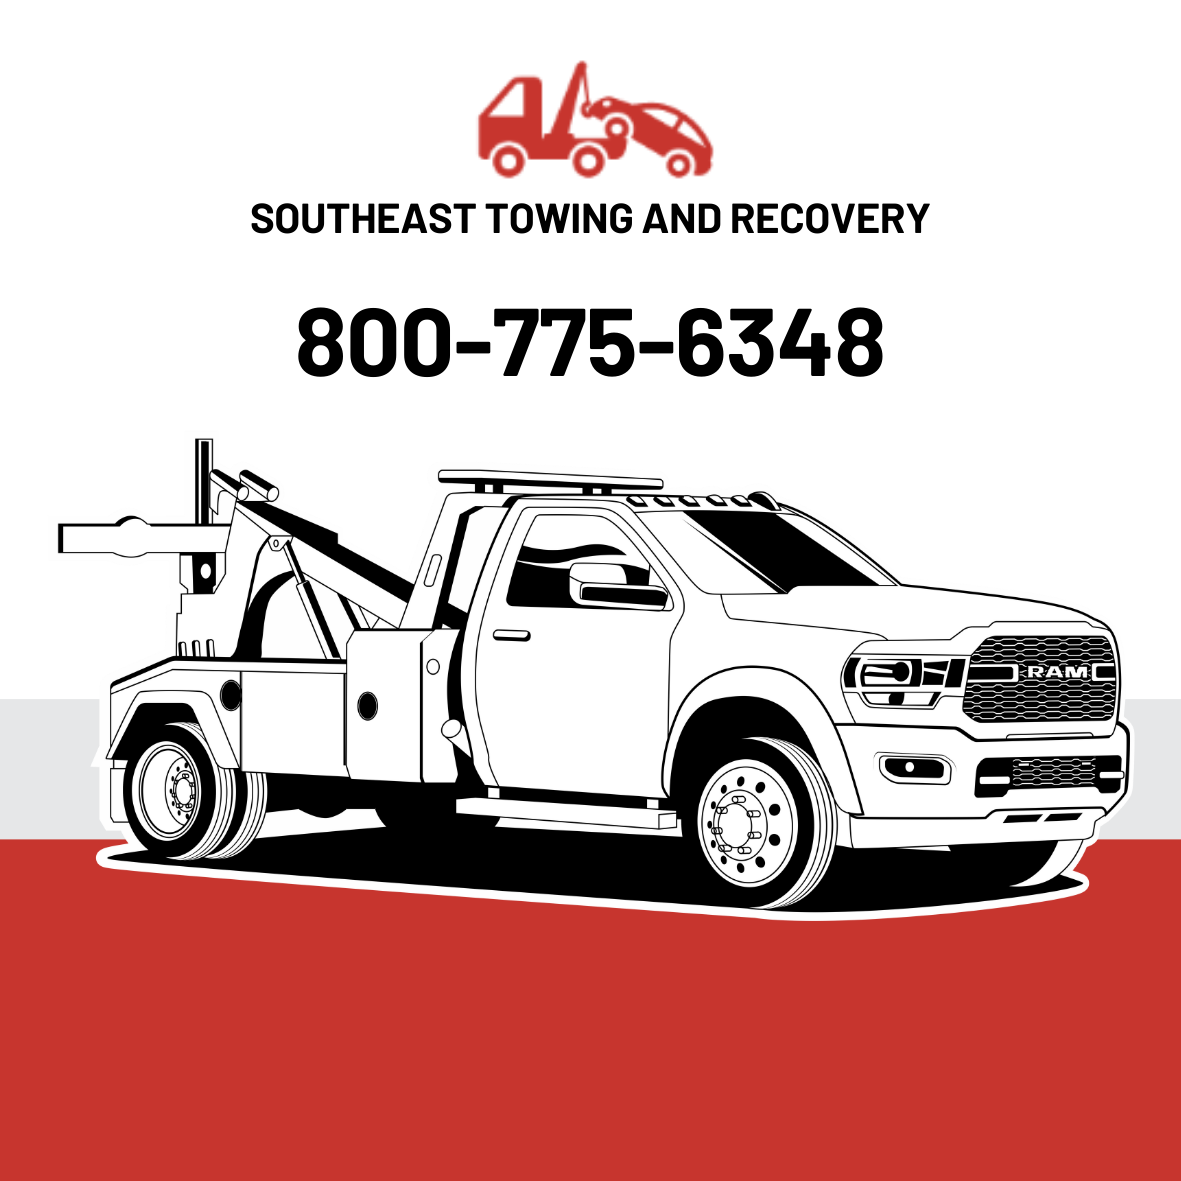 Tuner Cartoons Design Templates - Towing and Road Services Business